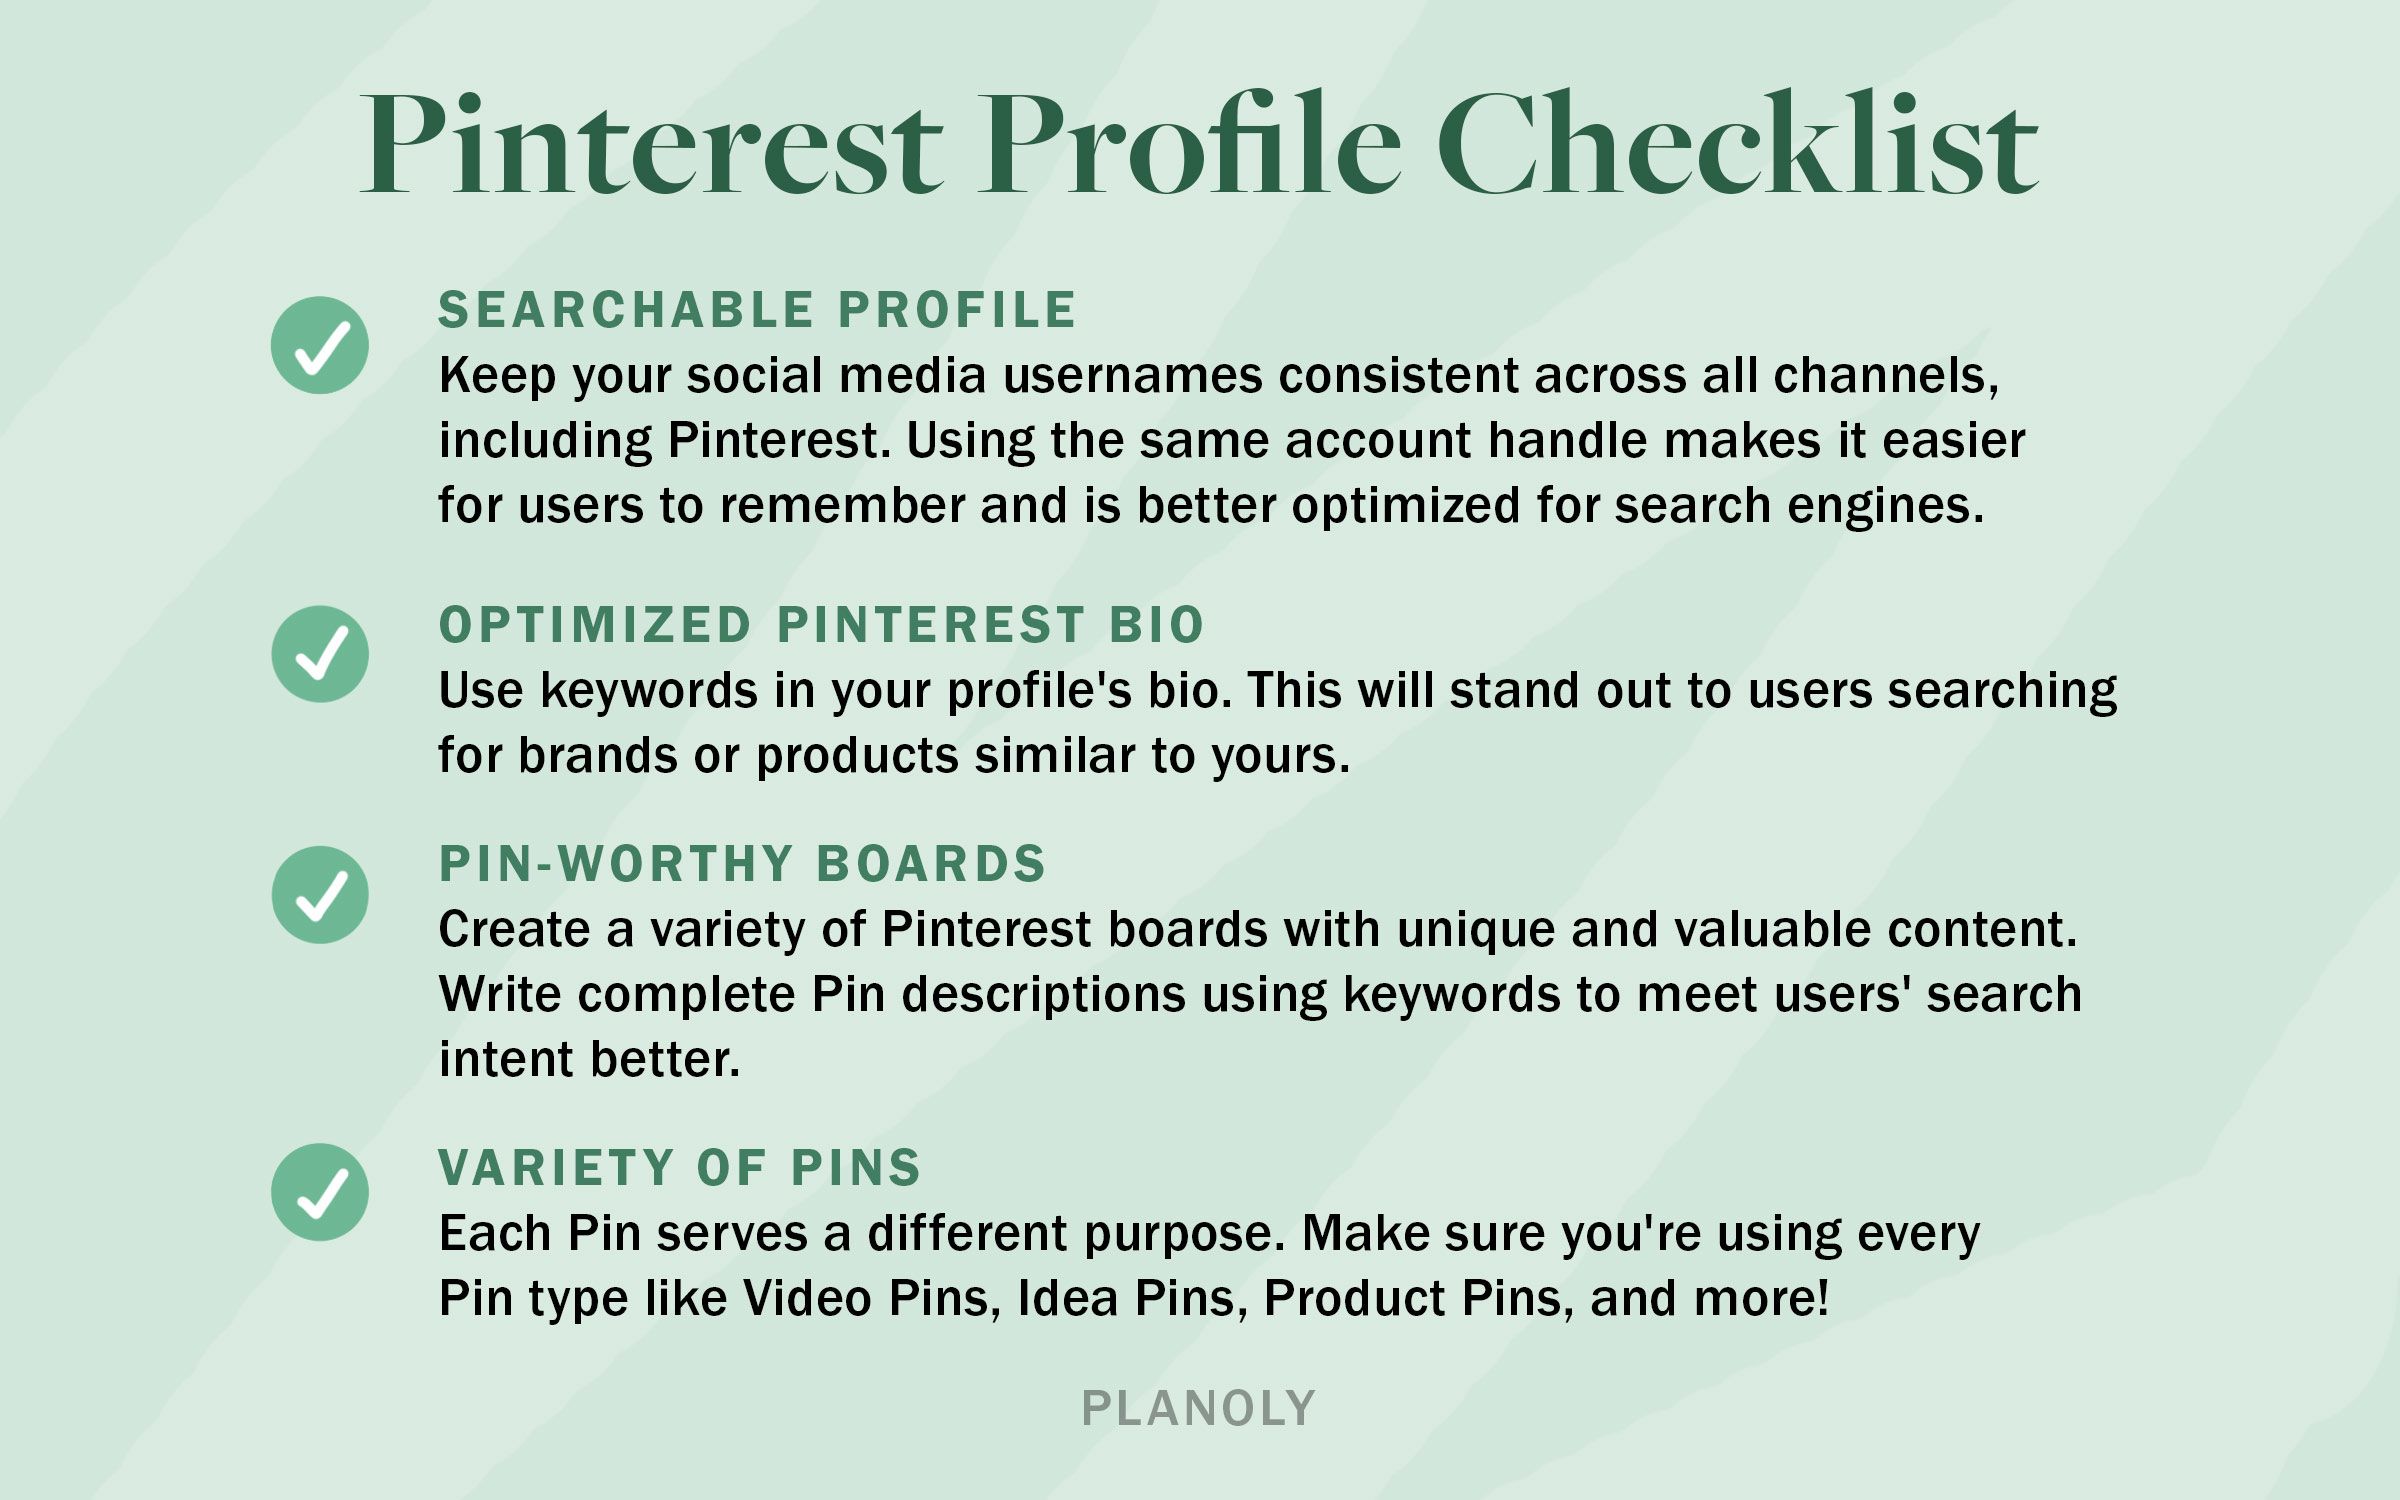 PLANOLY - Blog - How to Optimize Your Pinterest Content - Horizontal Image